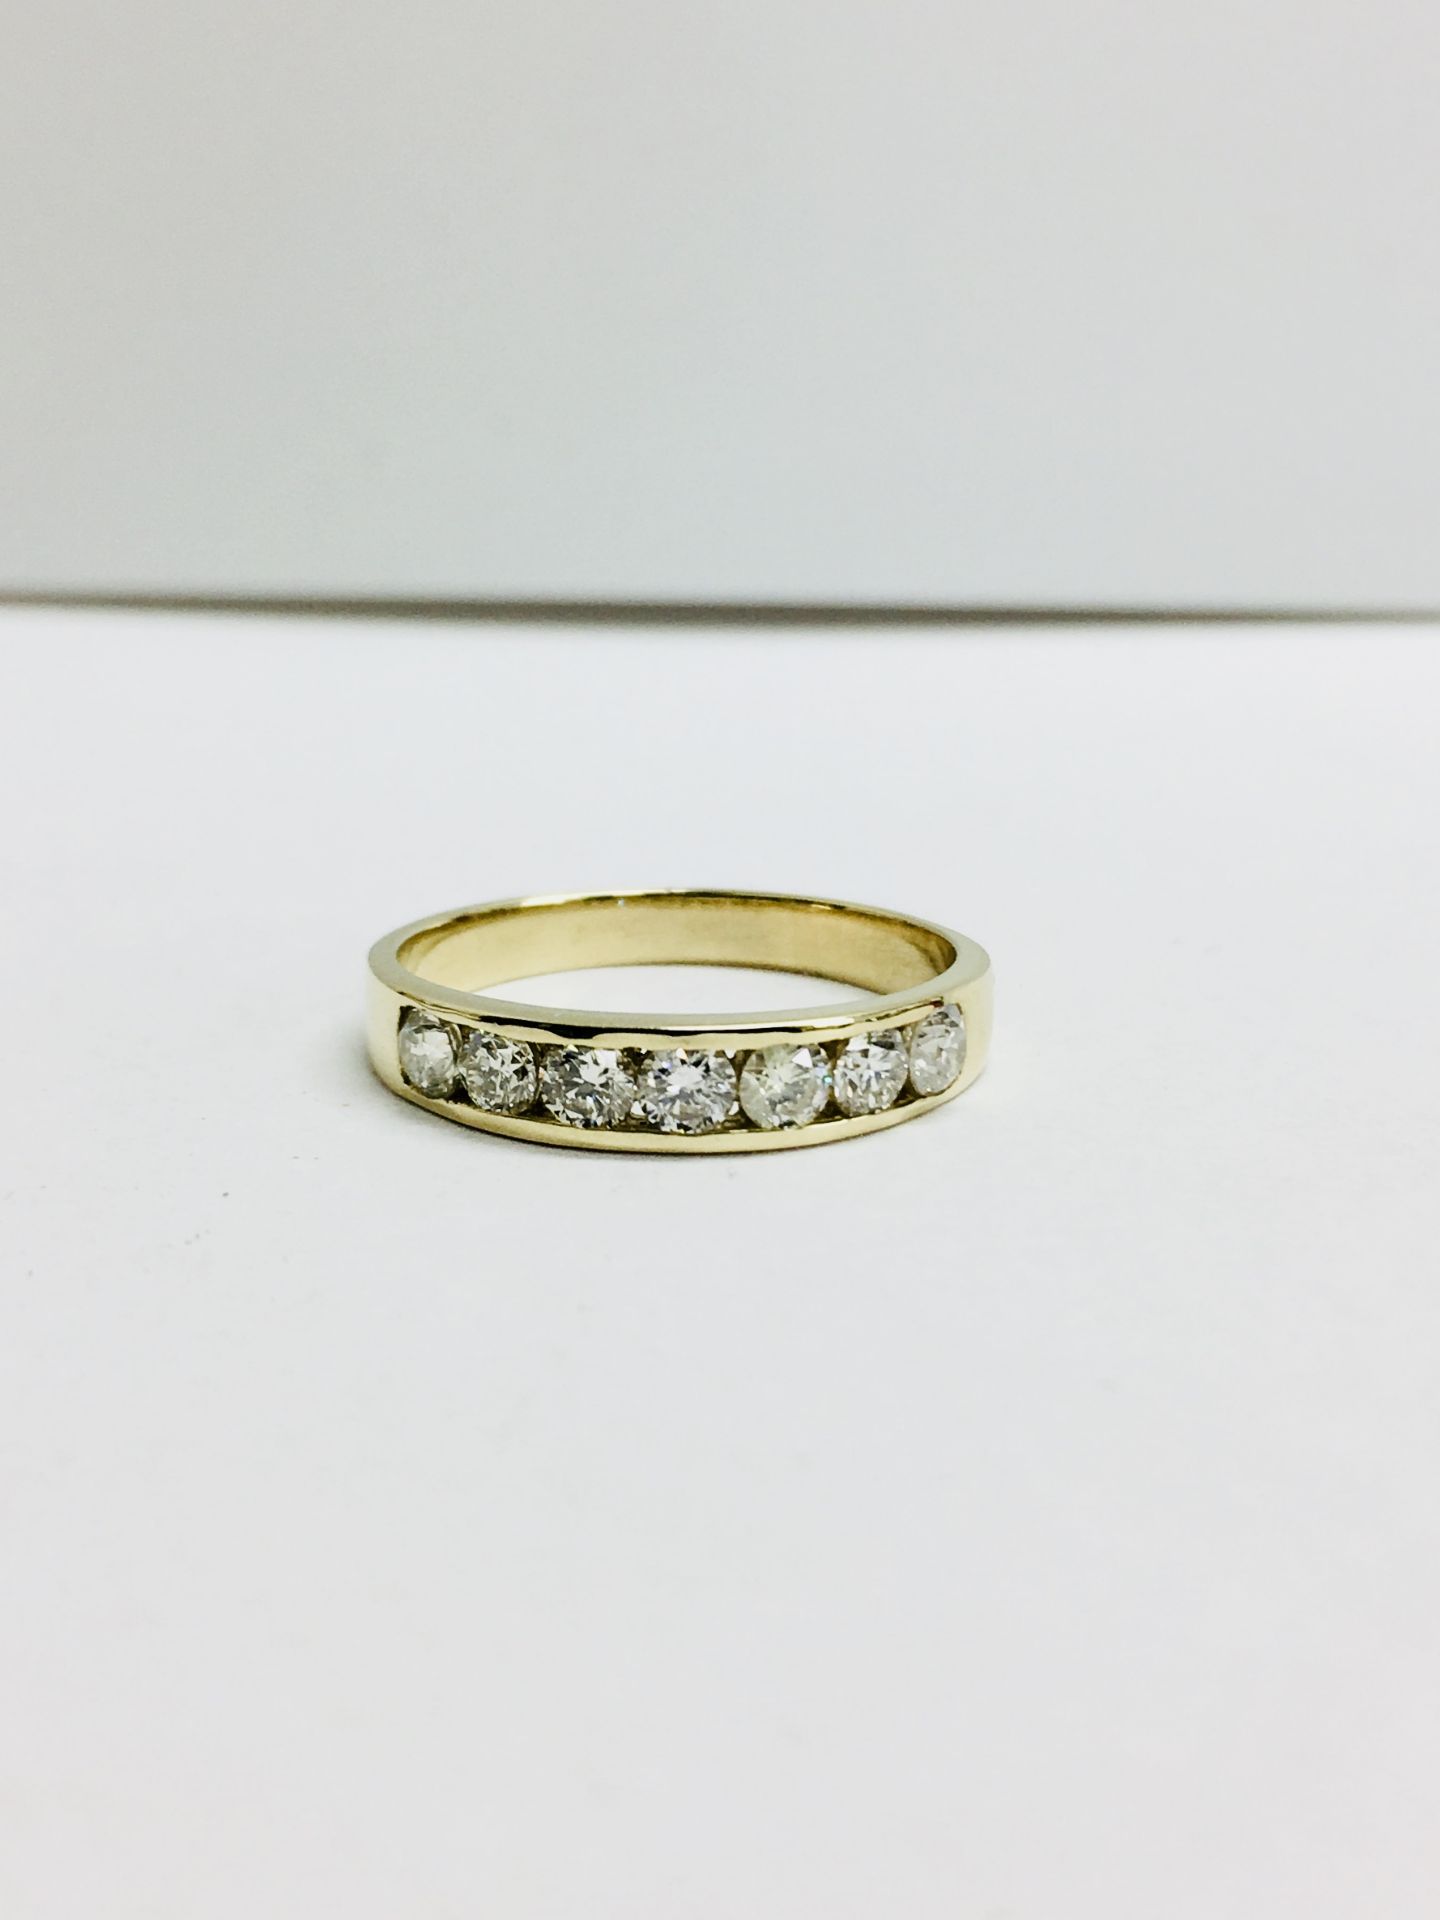 18ct yellow gold 0.70ct eternity Ring - Image 2 of 5